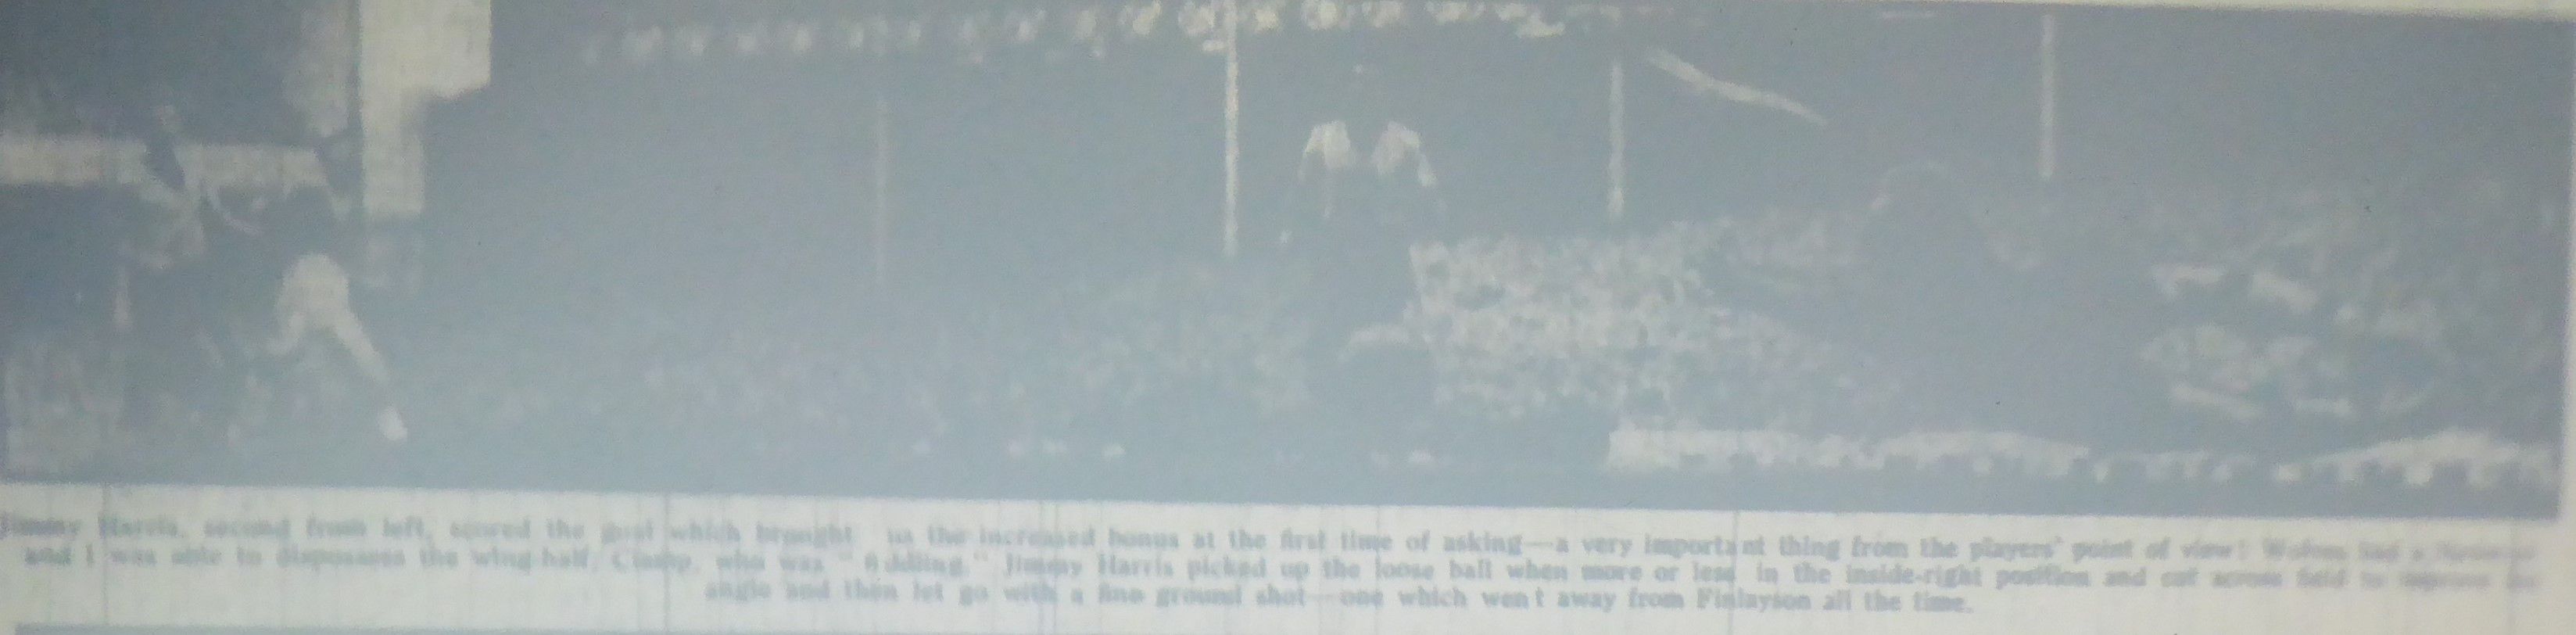 535a 24.08.57 Harris v Wolves (H) Jimmy Harris fires a low shot past Wolves keeper, Malcolm Fi...JPG